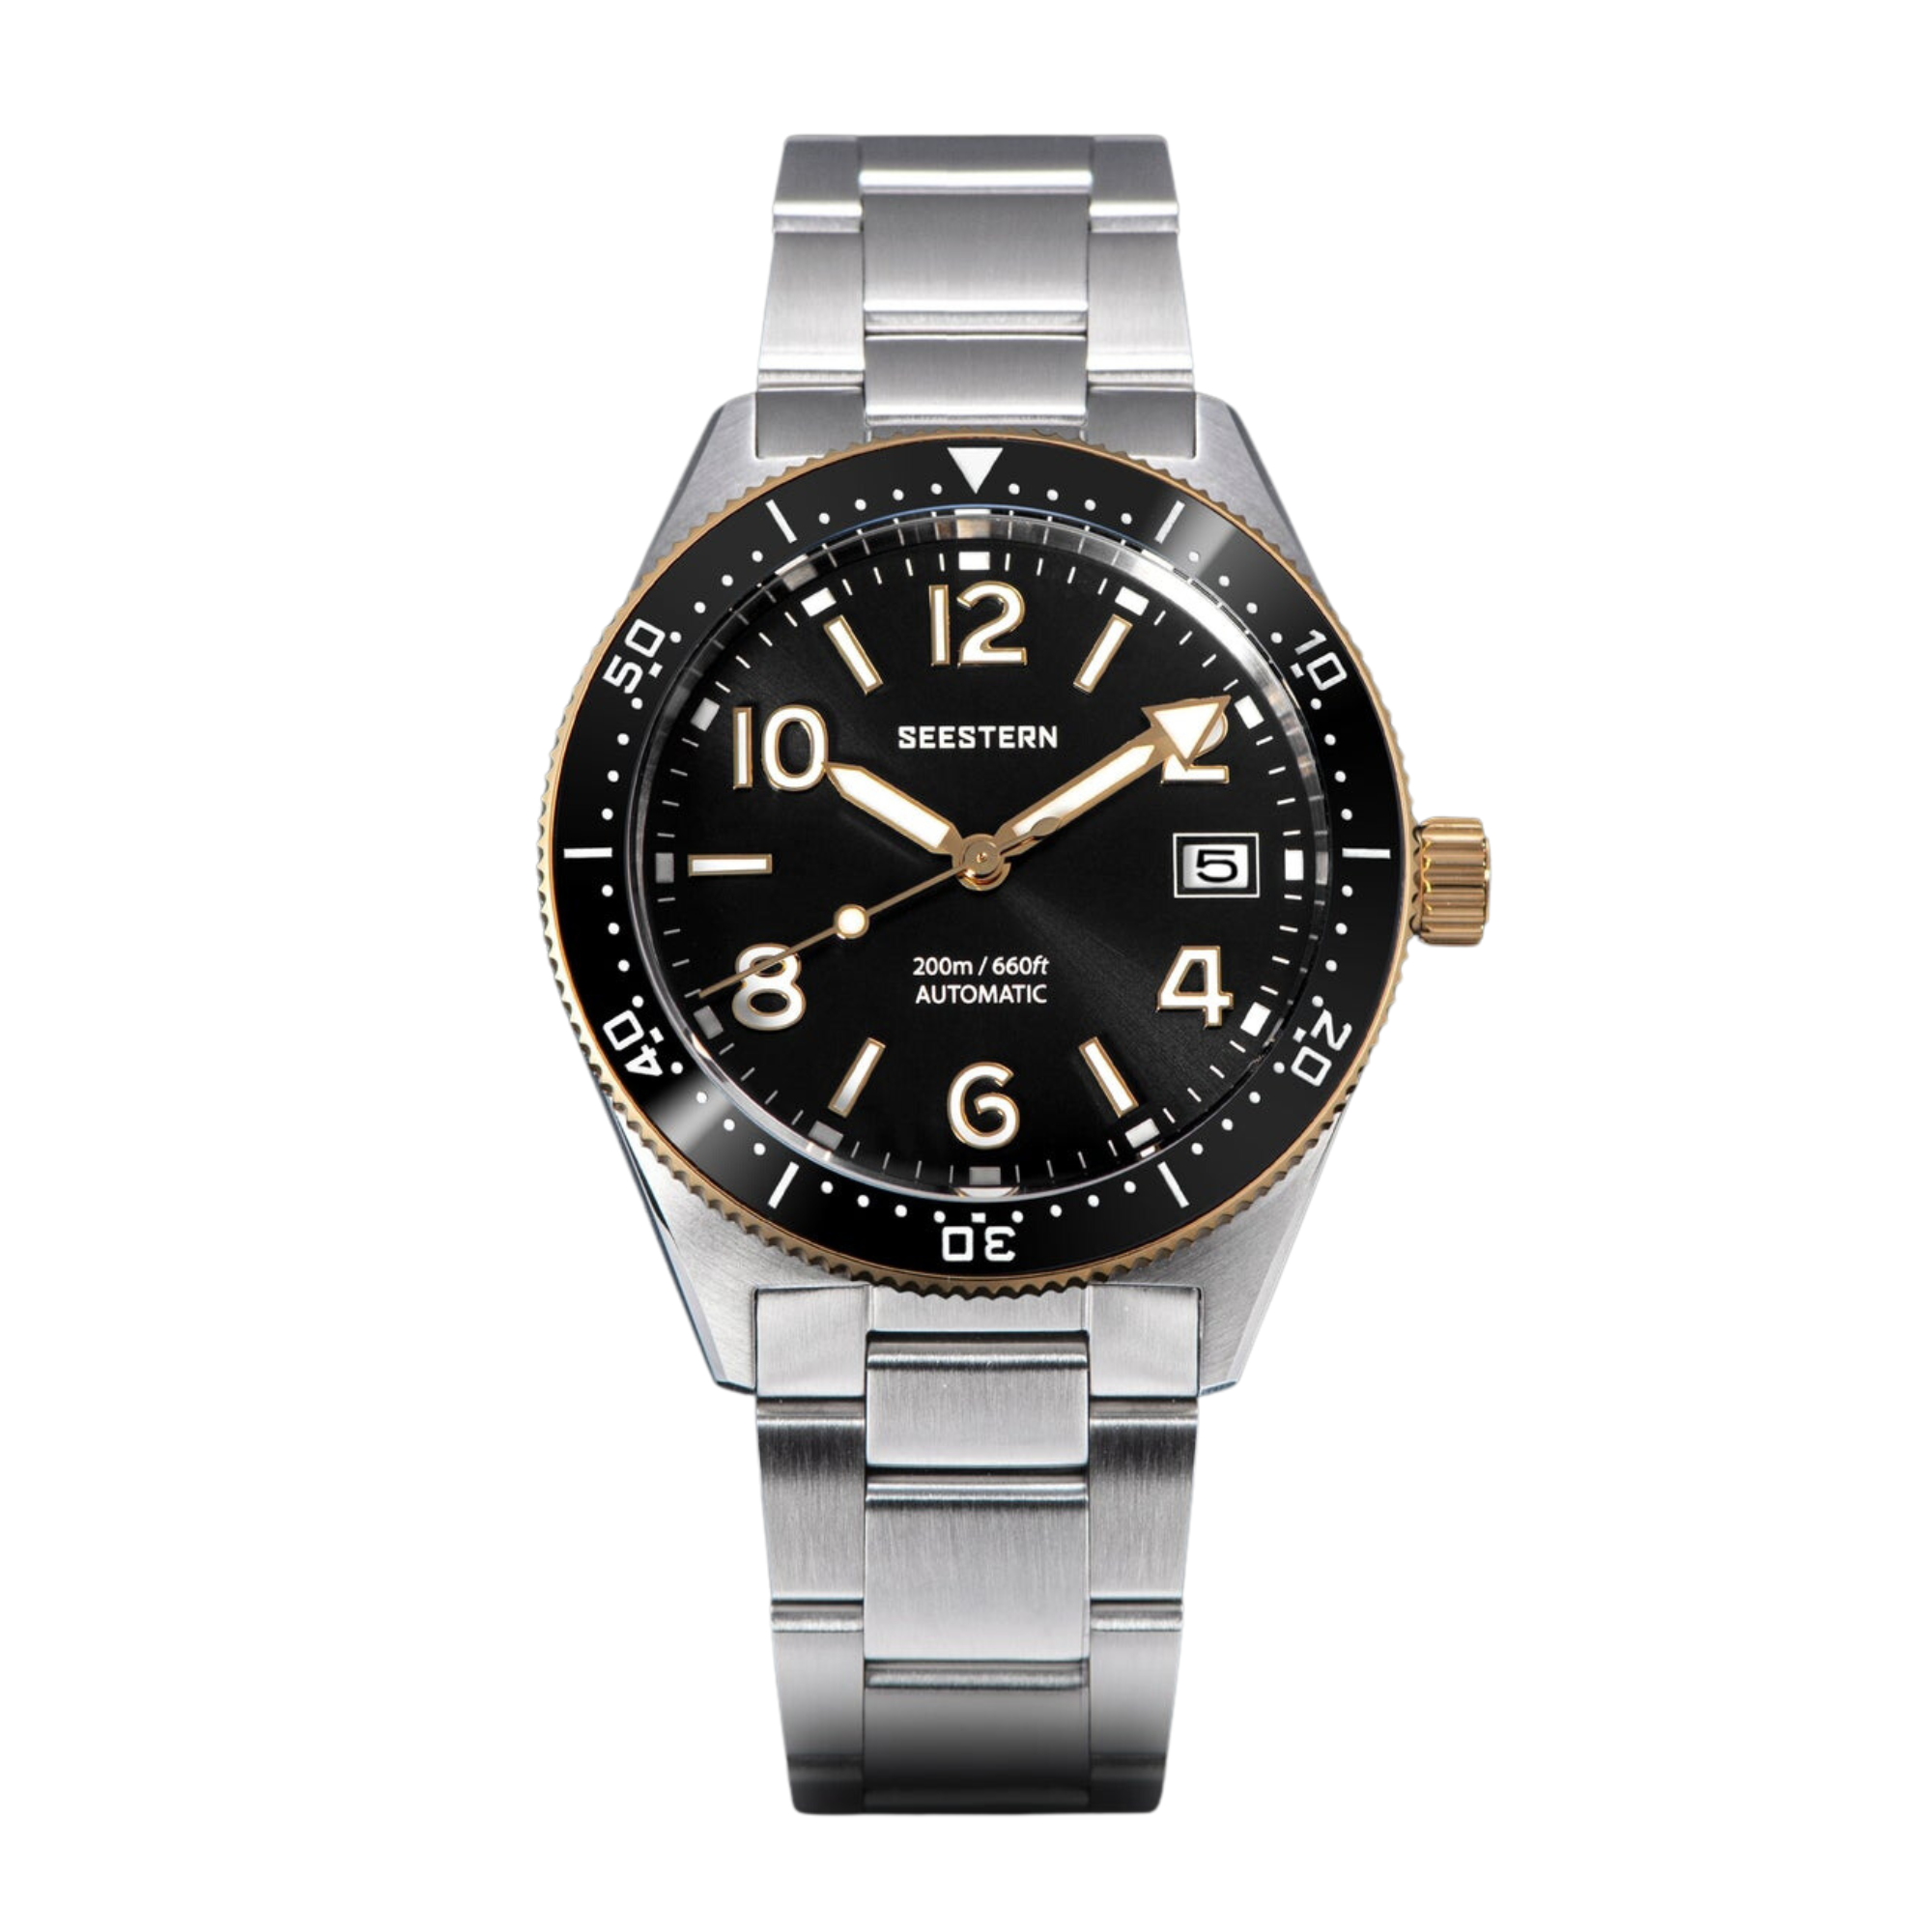 Seestern 434 Professional Diver Automatic 200m Water Resistant